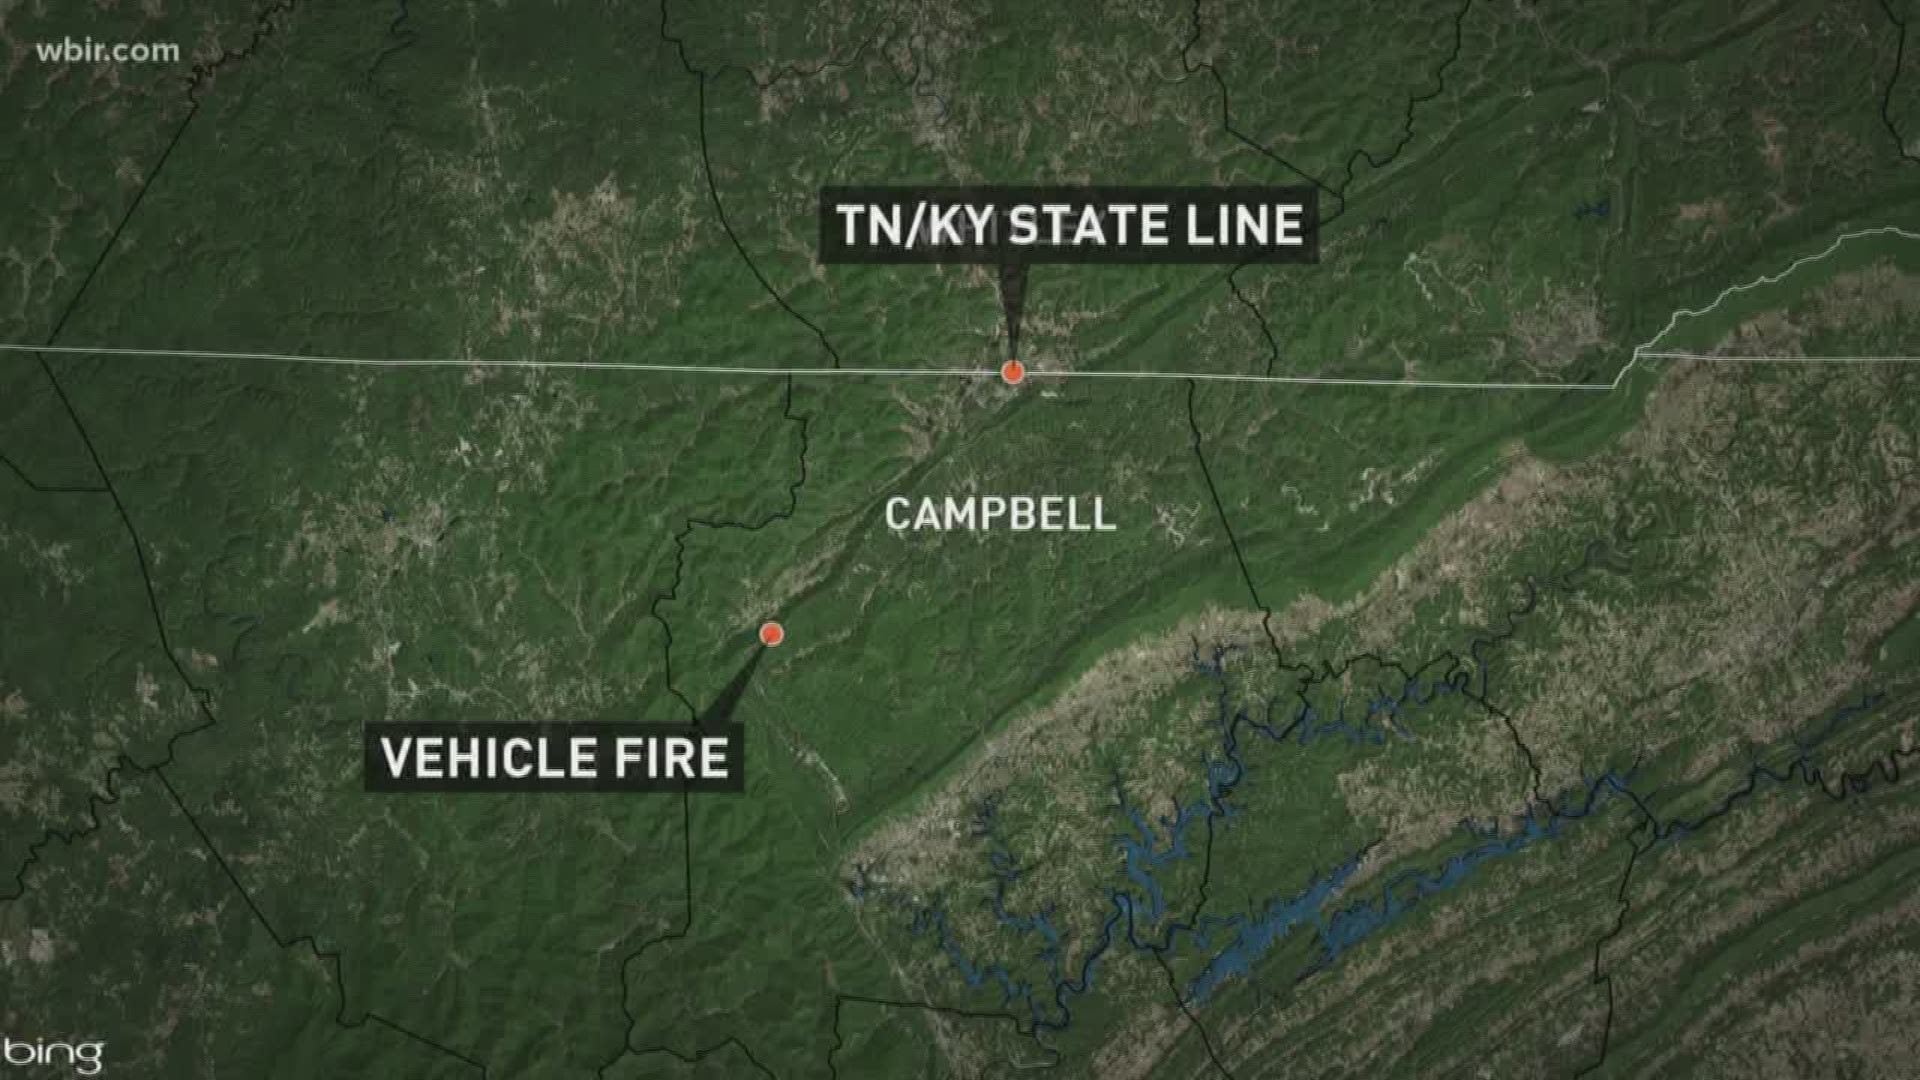 A commercial vehicle on fire has blocked Interstate 75 south at mile 151 in Campbell County, according to the Tennessee Department of Transportation.